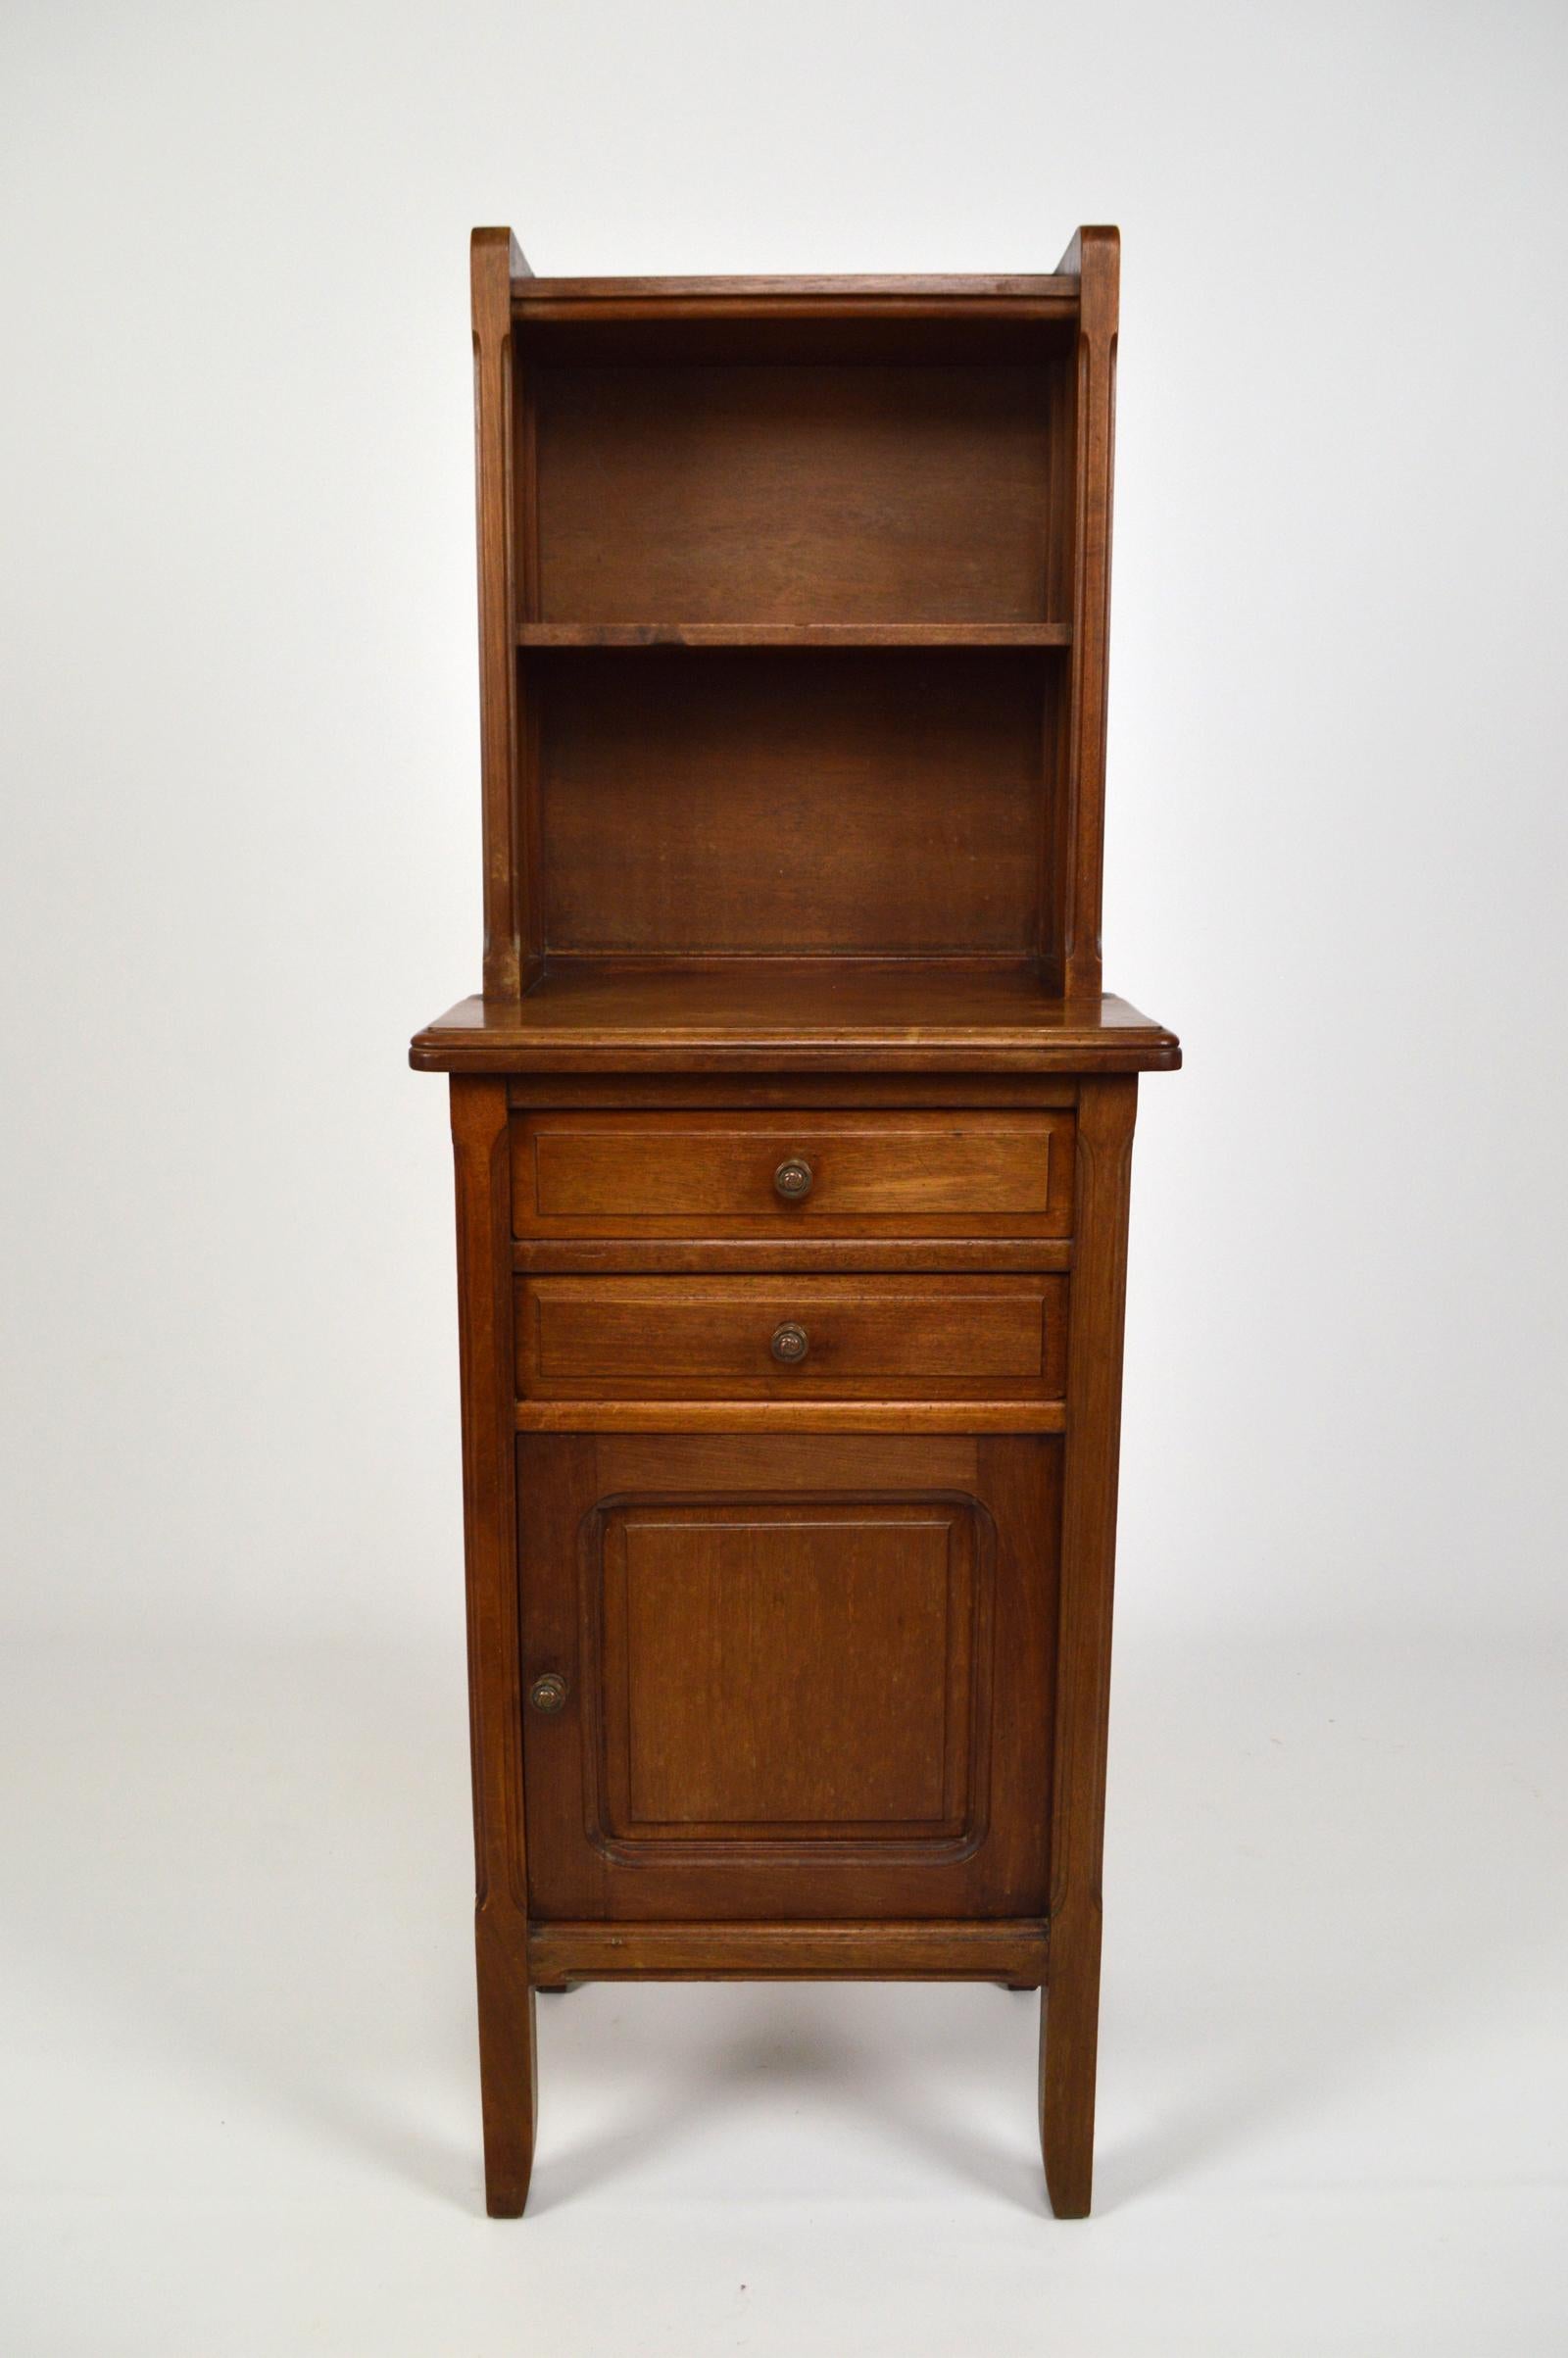 Pretty bedside table / nightstand in mahogany, composed of 2 shelves, 2 drawers and 1 porcelain-clad cupboard.
Bronze door knobs.

Art Nouveau, France, circa 1920.
By cabinetmaker Mathieu Gallerey (documentation + stamp present on other furniture